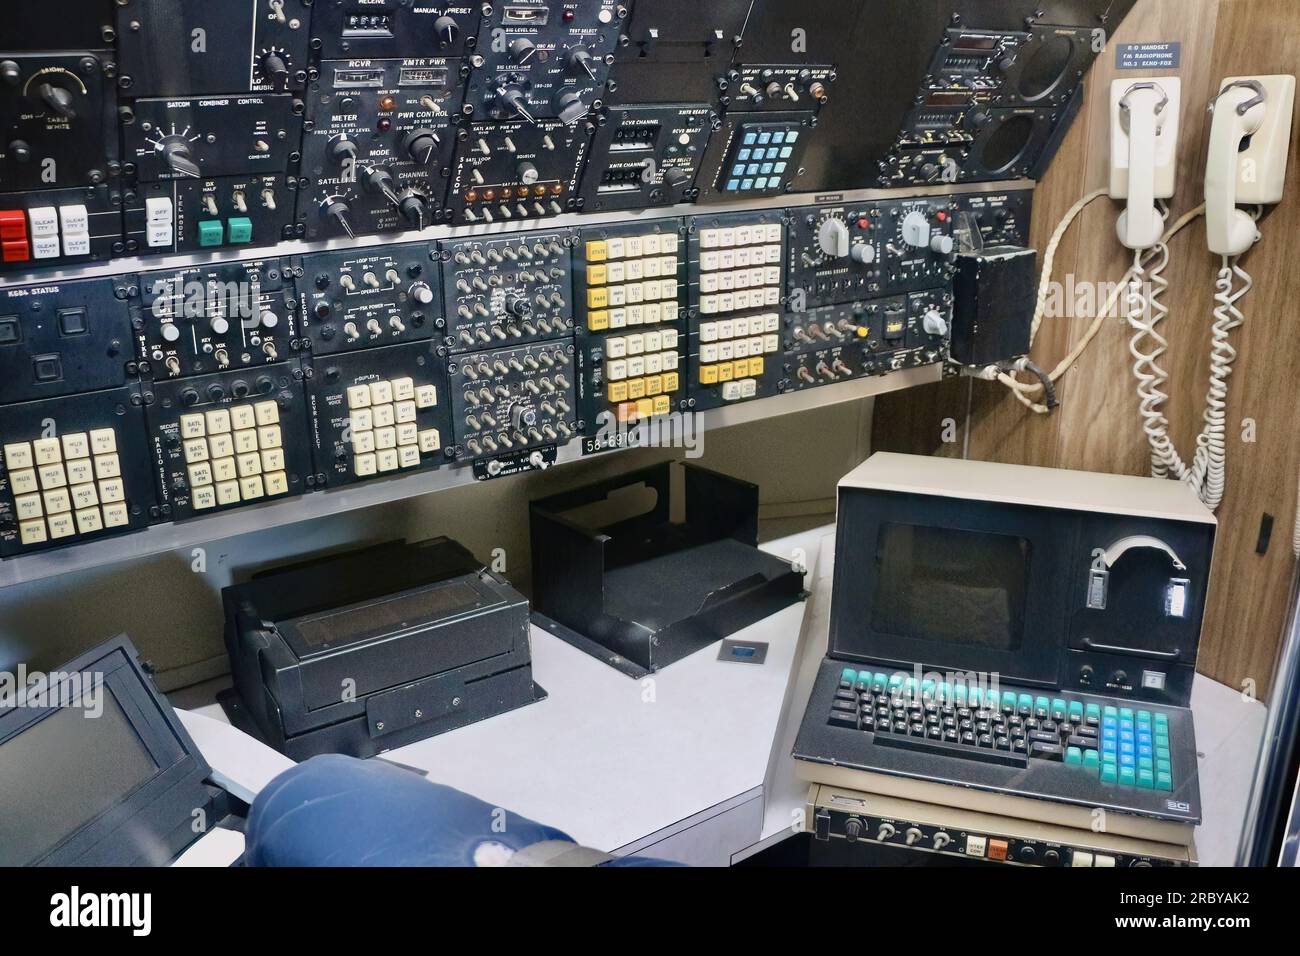 Command post on the Boeing VC-137B 'Air Force One' presidential aircraft in the Aviation Pavilion The Museum of Flight Seattle Washington State USA Stock Photo